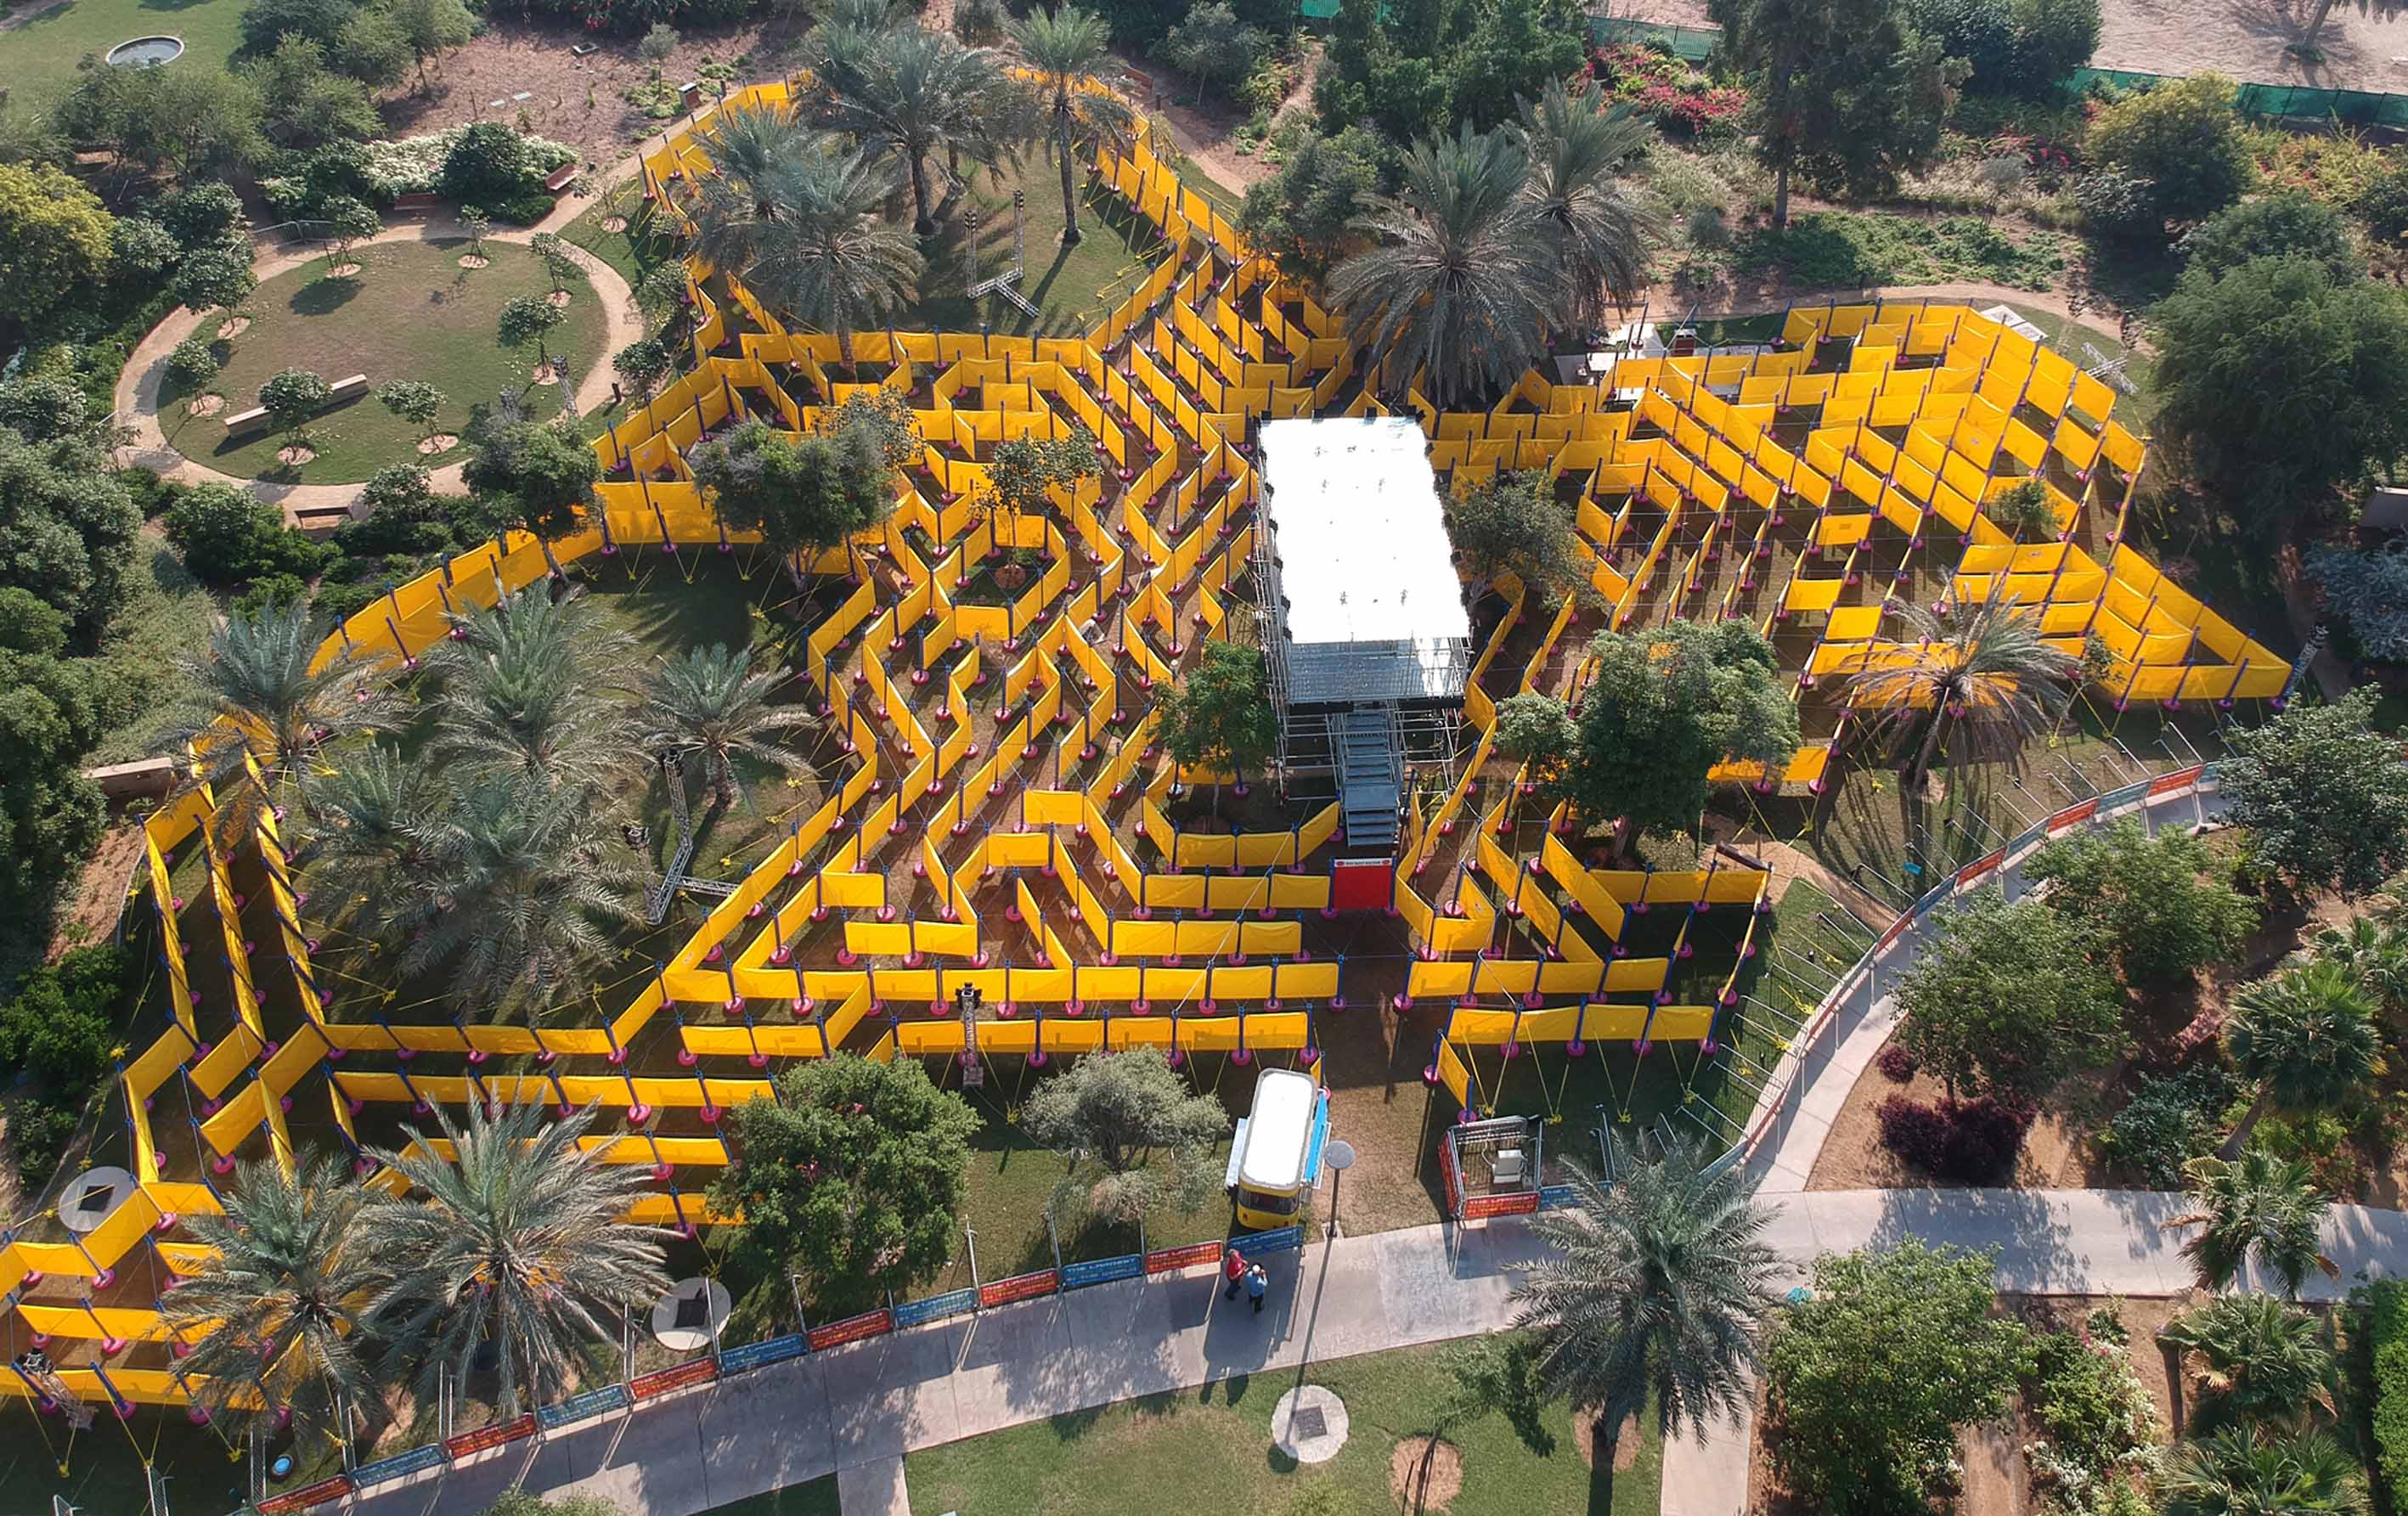 “The Wonder Maze”, the world’s largest mobile maze opens in Abu Dhabi - The ...2835 x 1785